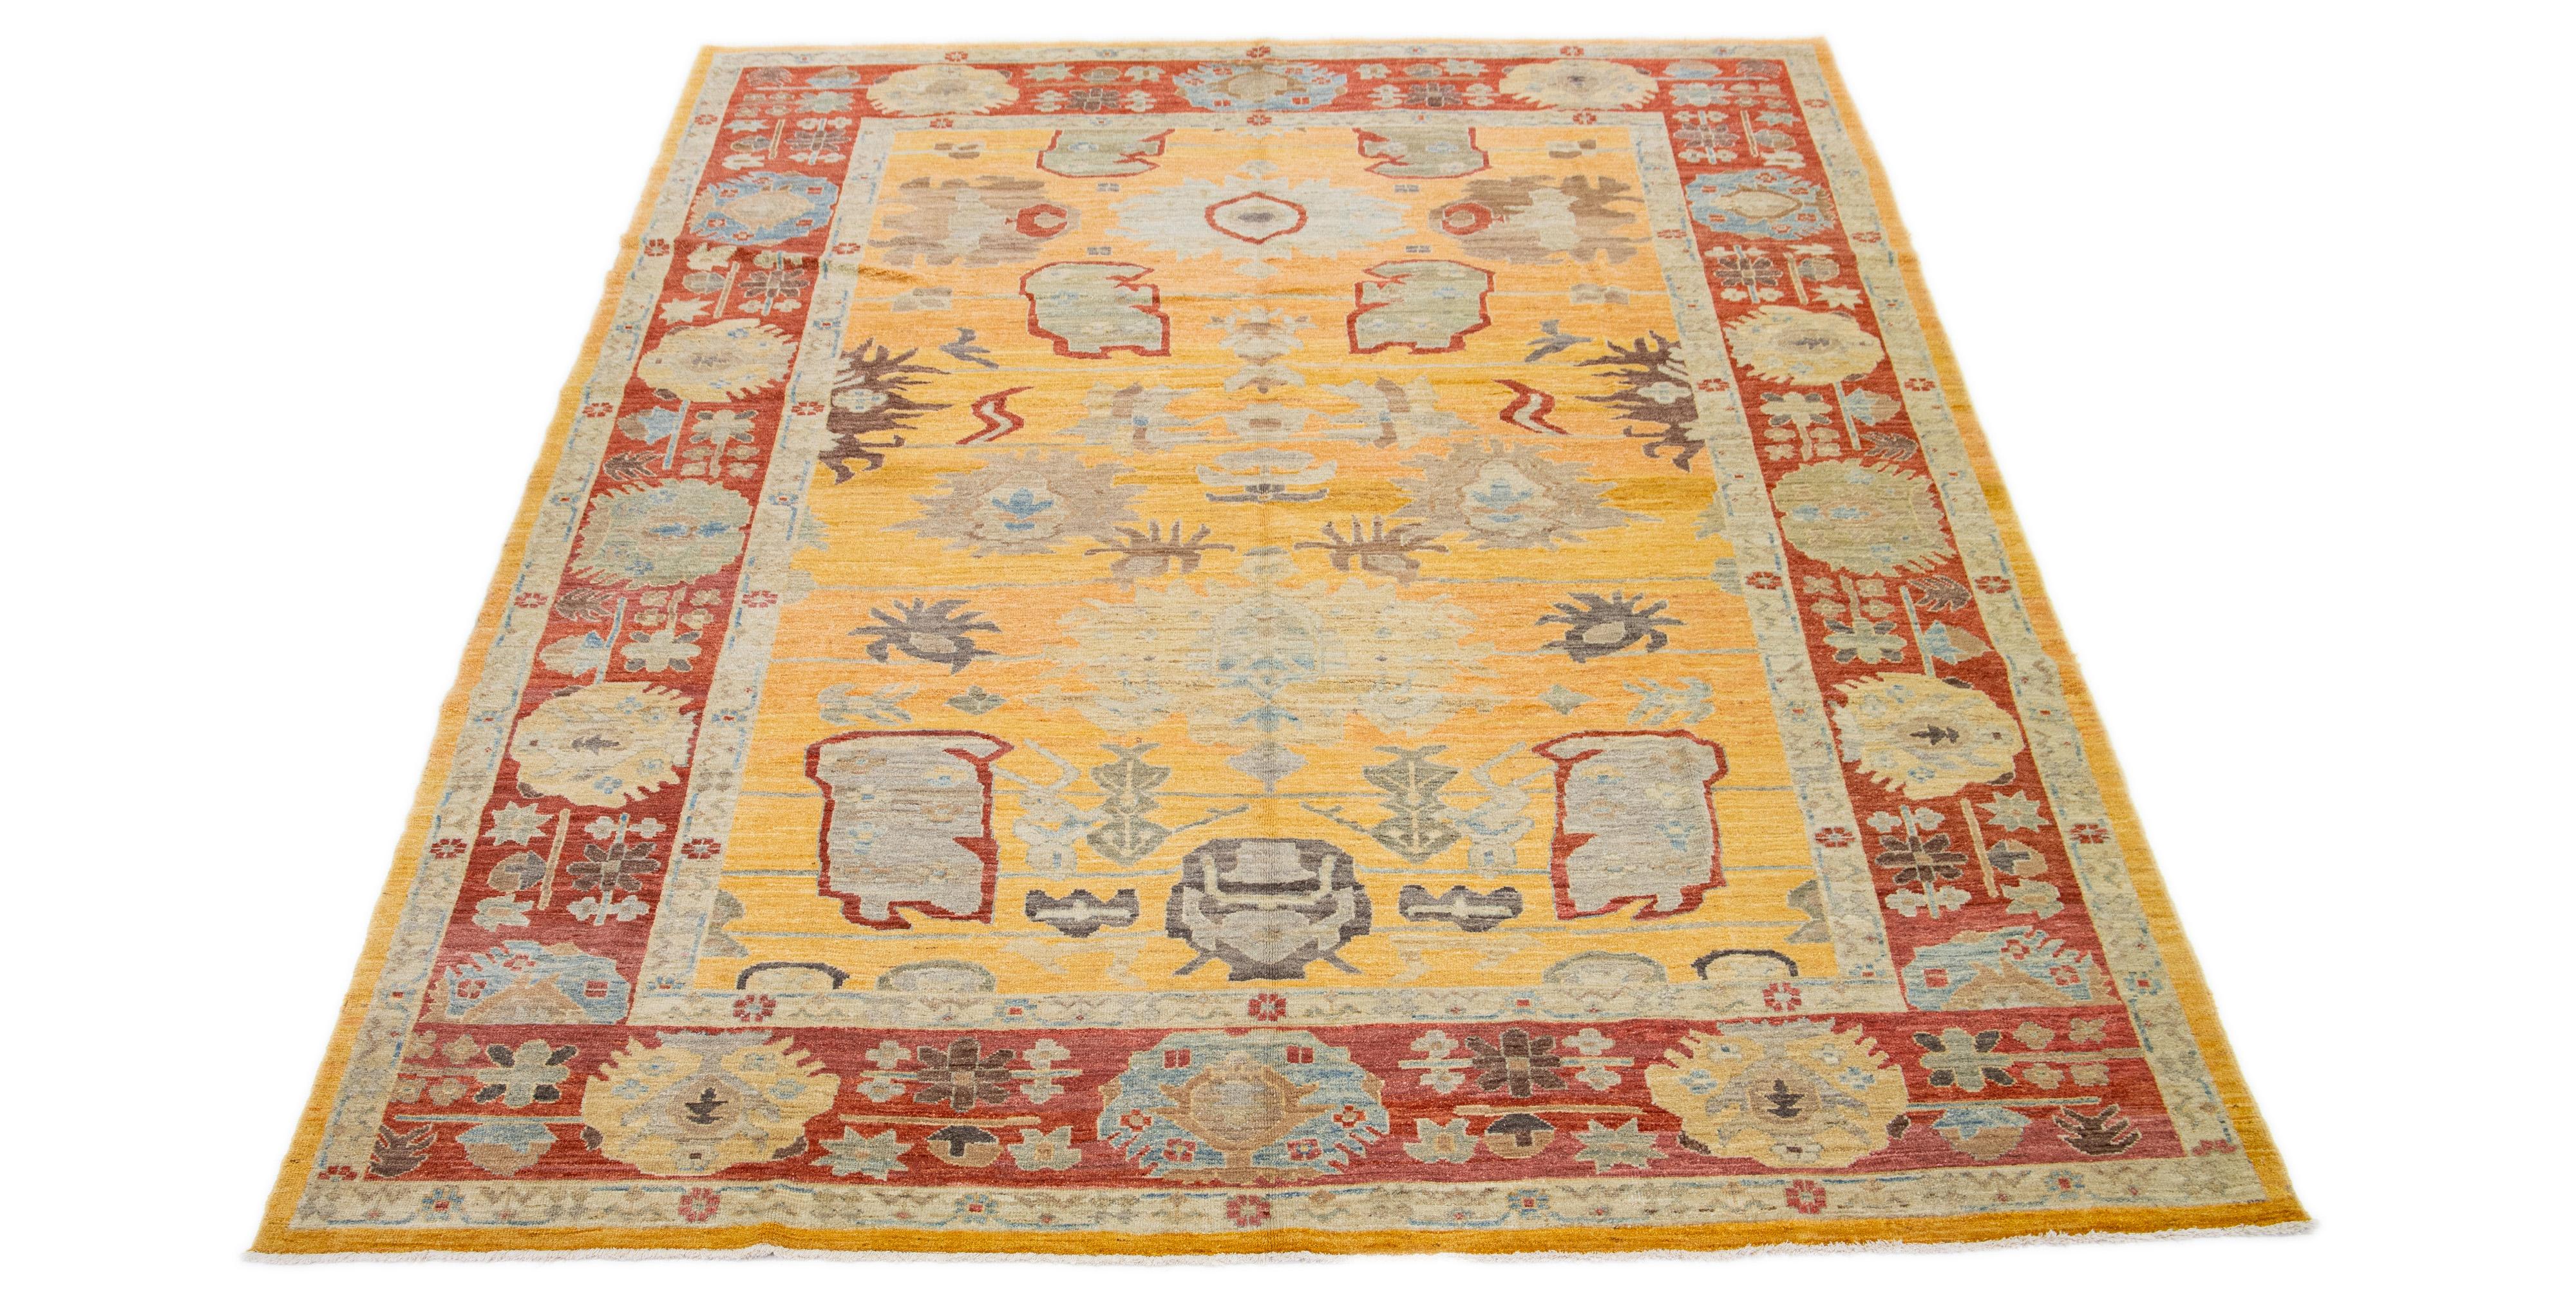 This stunning, hand-knotted Sultanabad rug showcases artisanal craftsmanship and aesthetic beauty. The rug features a captivating floral pattern overlaid on a geometric design set against a yellow backdrop. Its visual appeal is further enhanced by